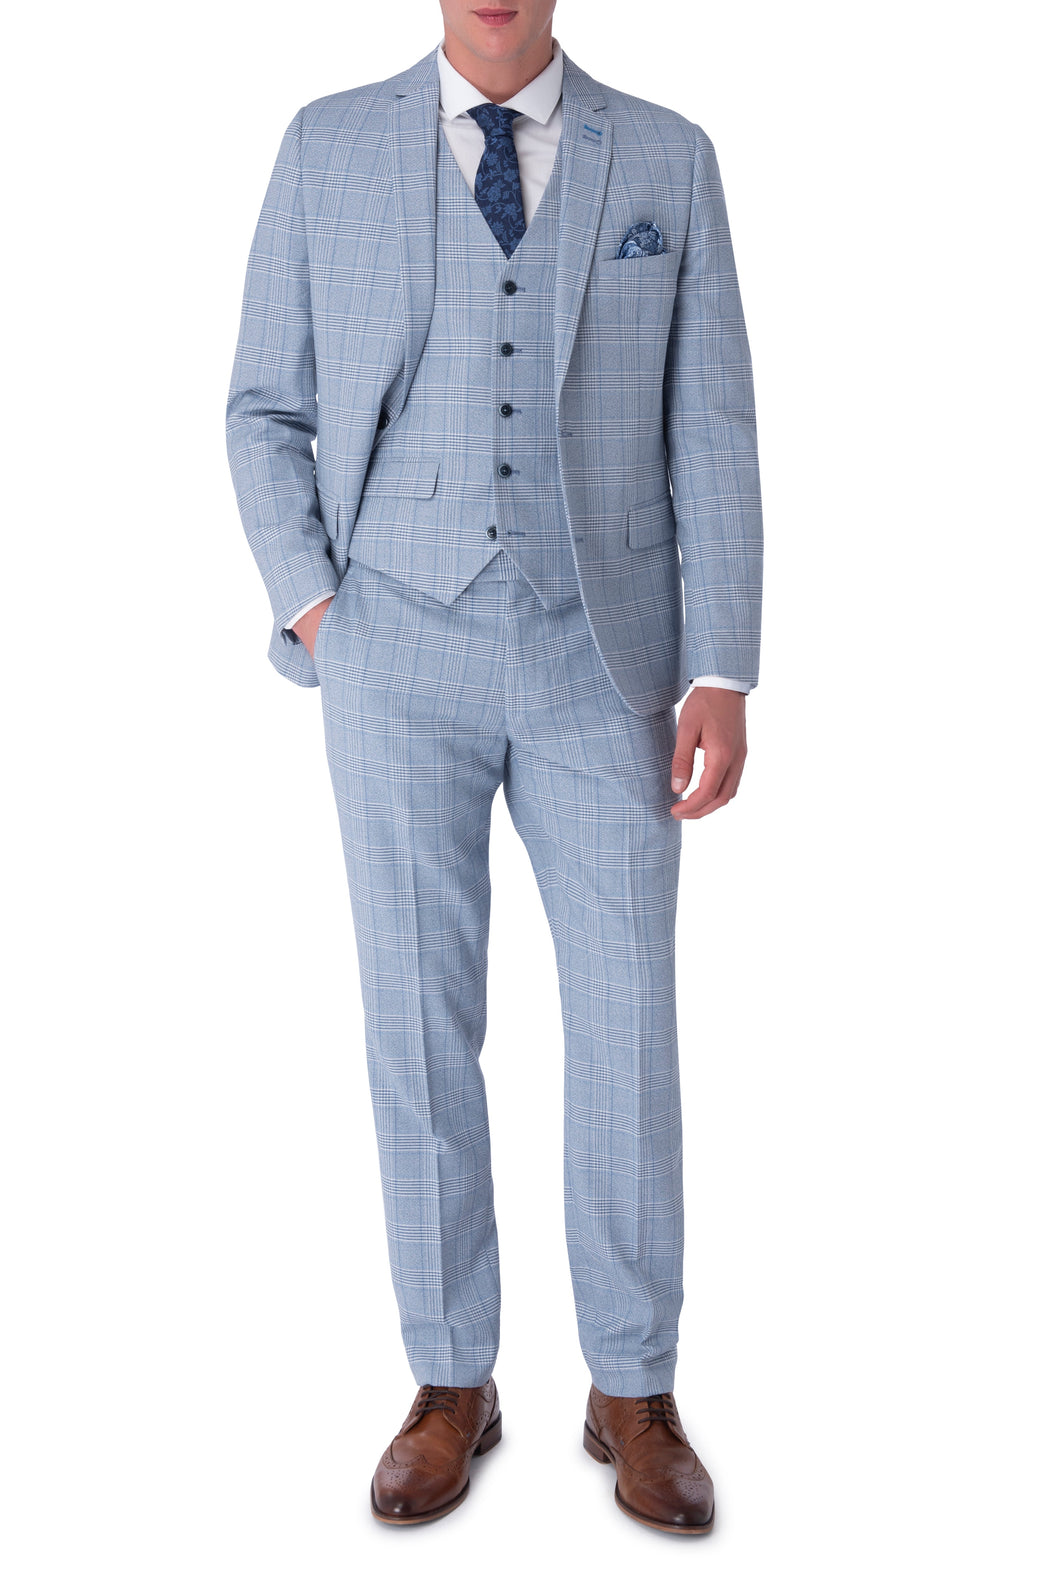 Nathan Harry Brown Blue Check Three Piece Slim Fit Suit RRP £259